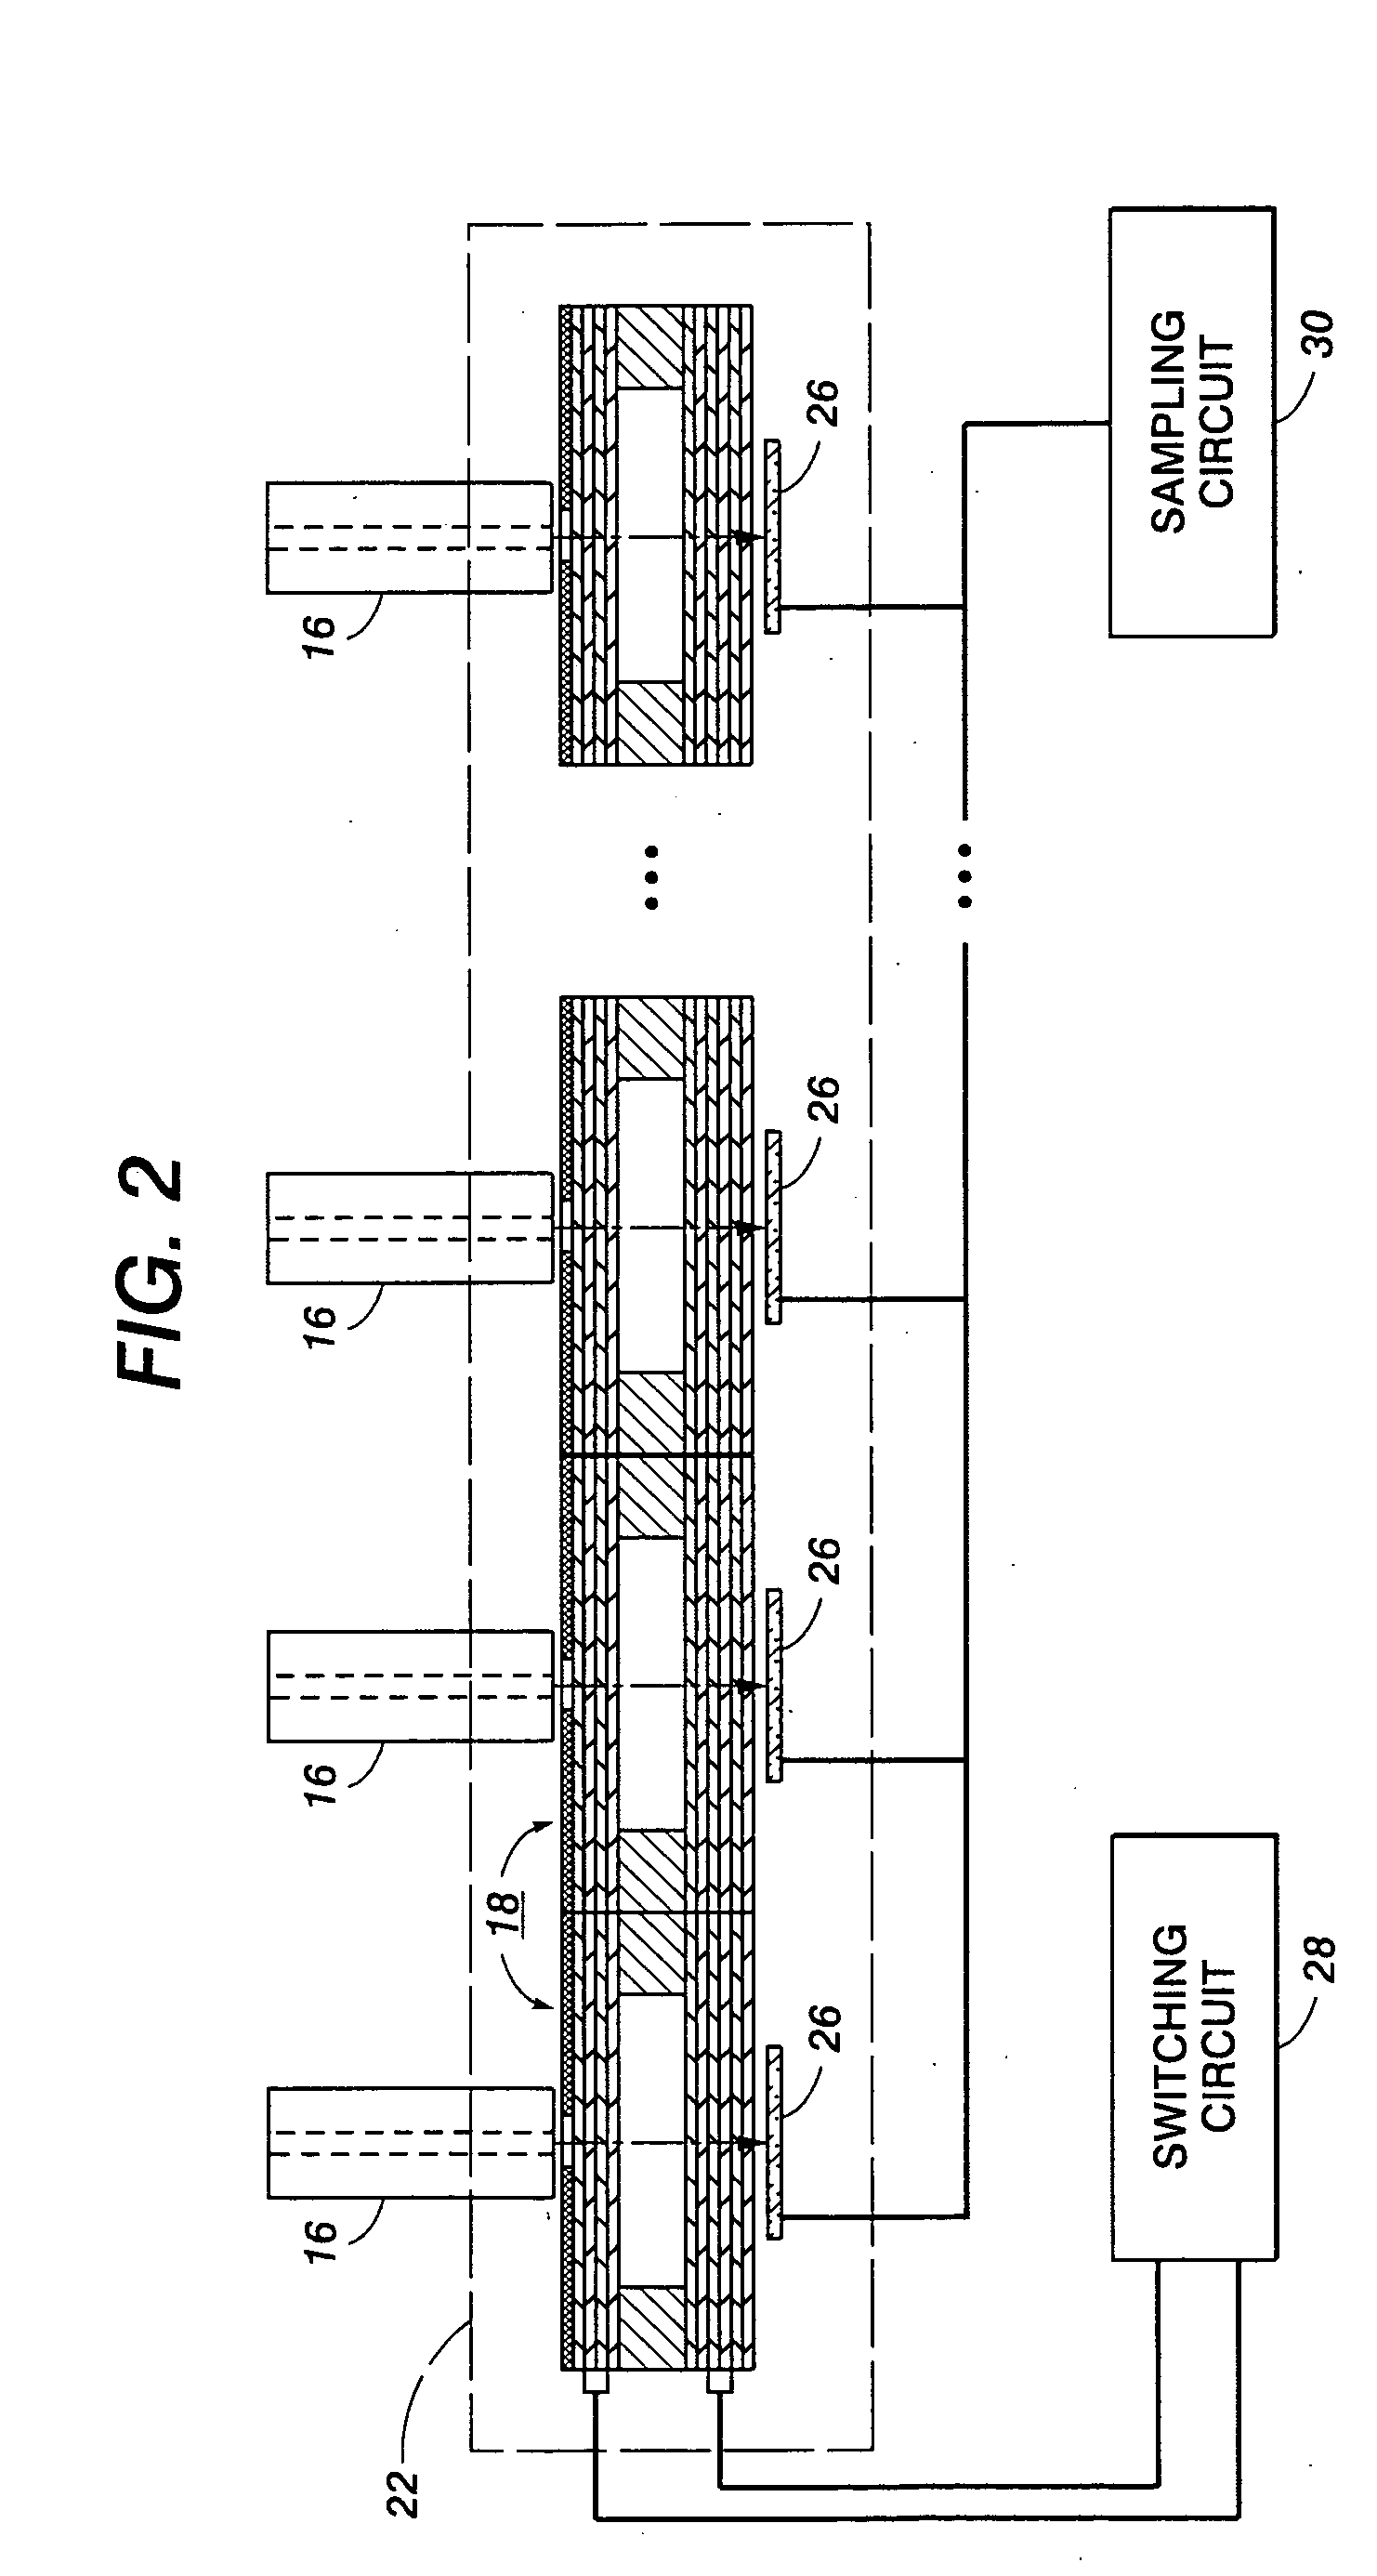 Full width array mechanically tunable spectrophotometer